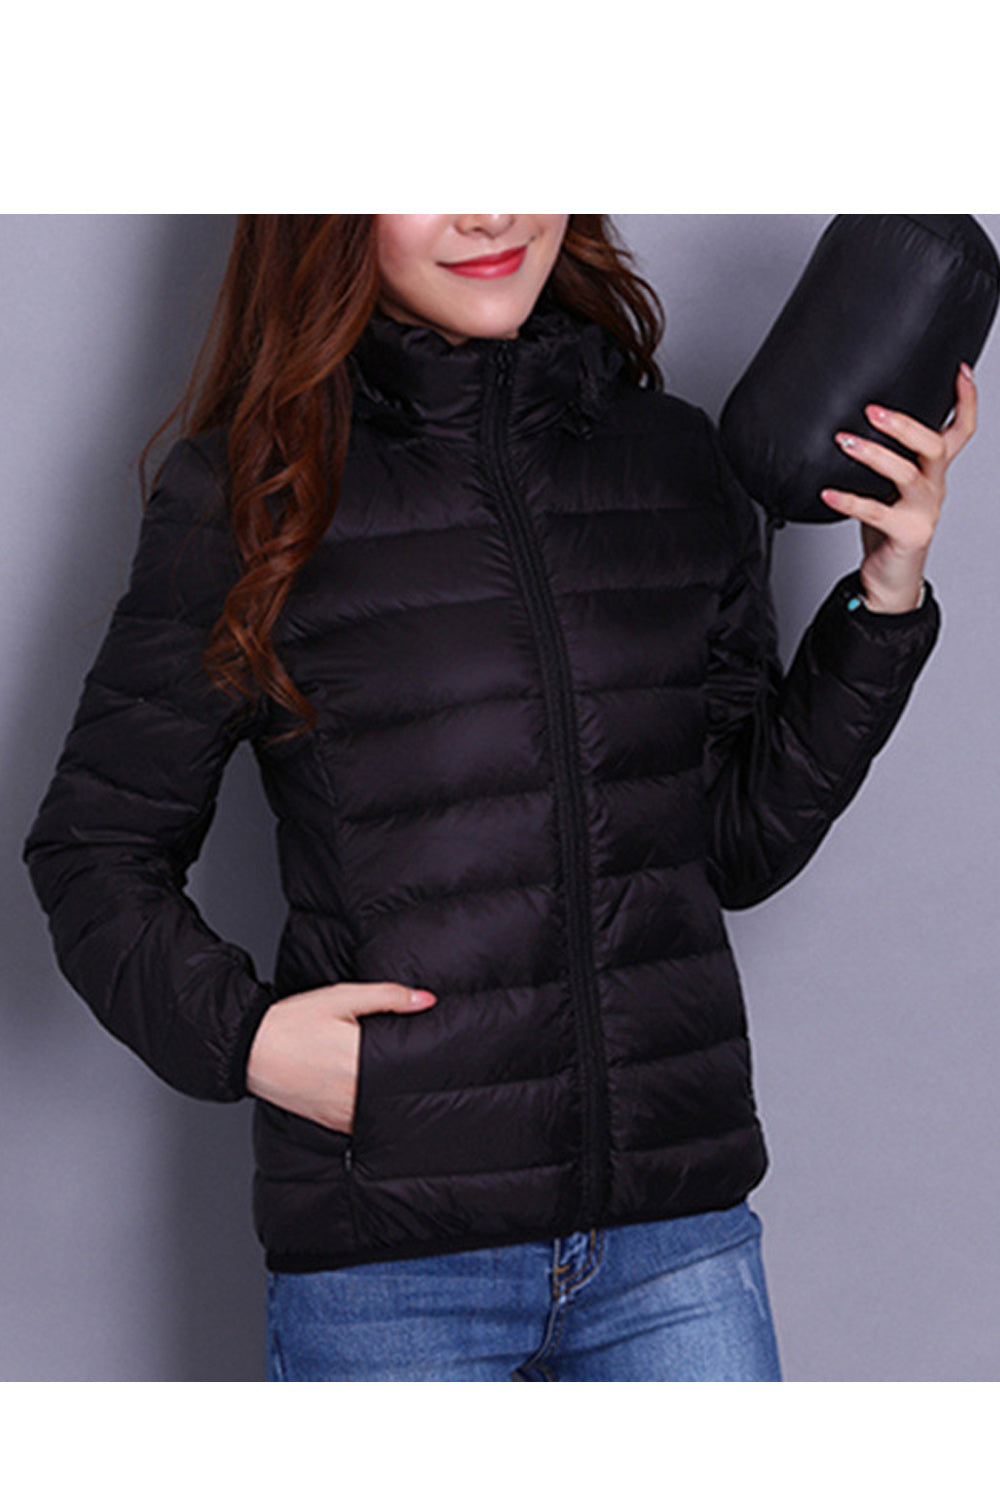 Women Solid Colored Warm Thick Long Sleeve Winter Padded Jacket - WPJ89407